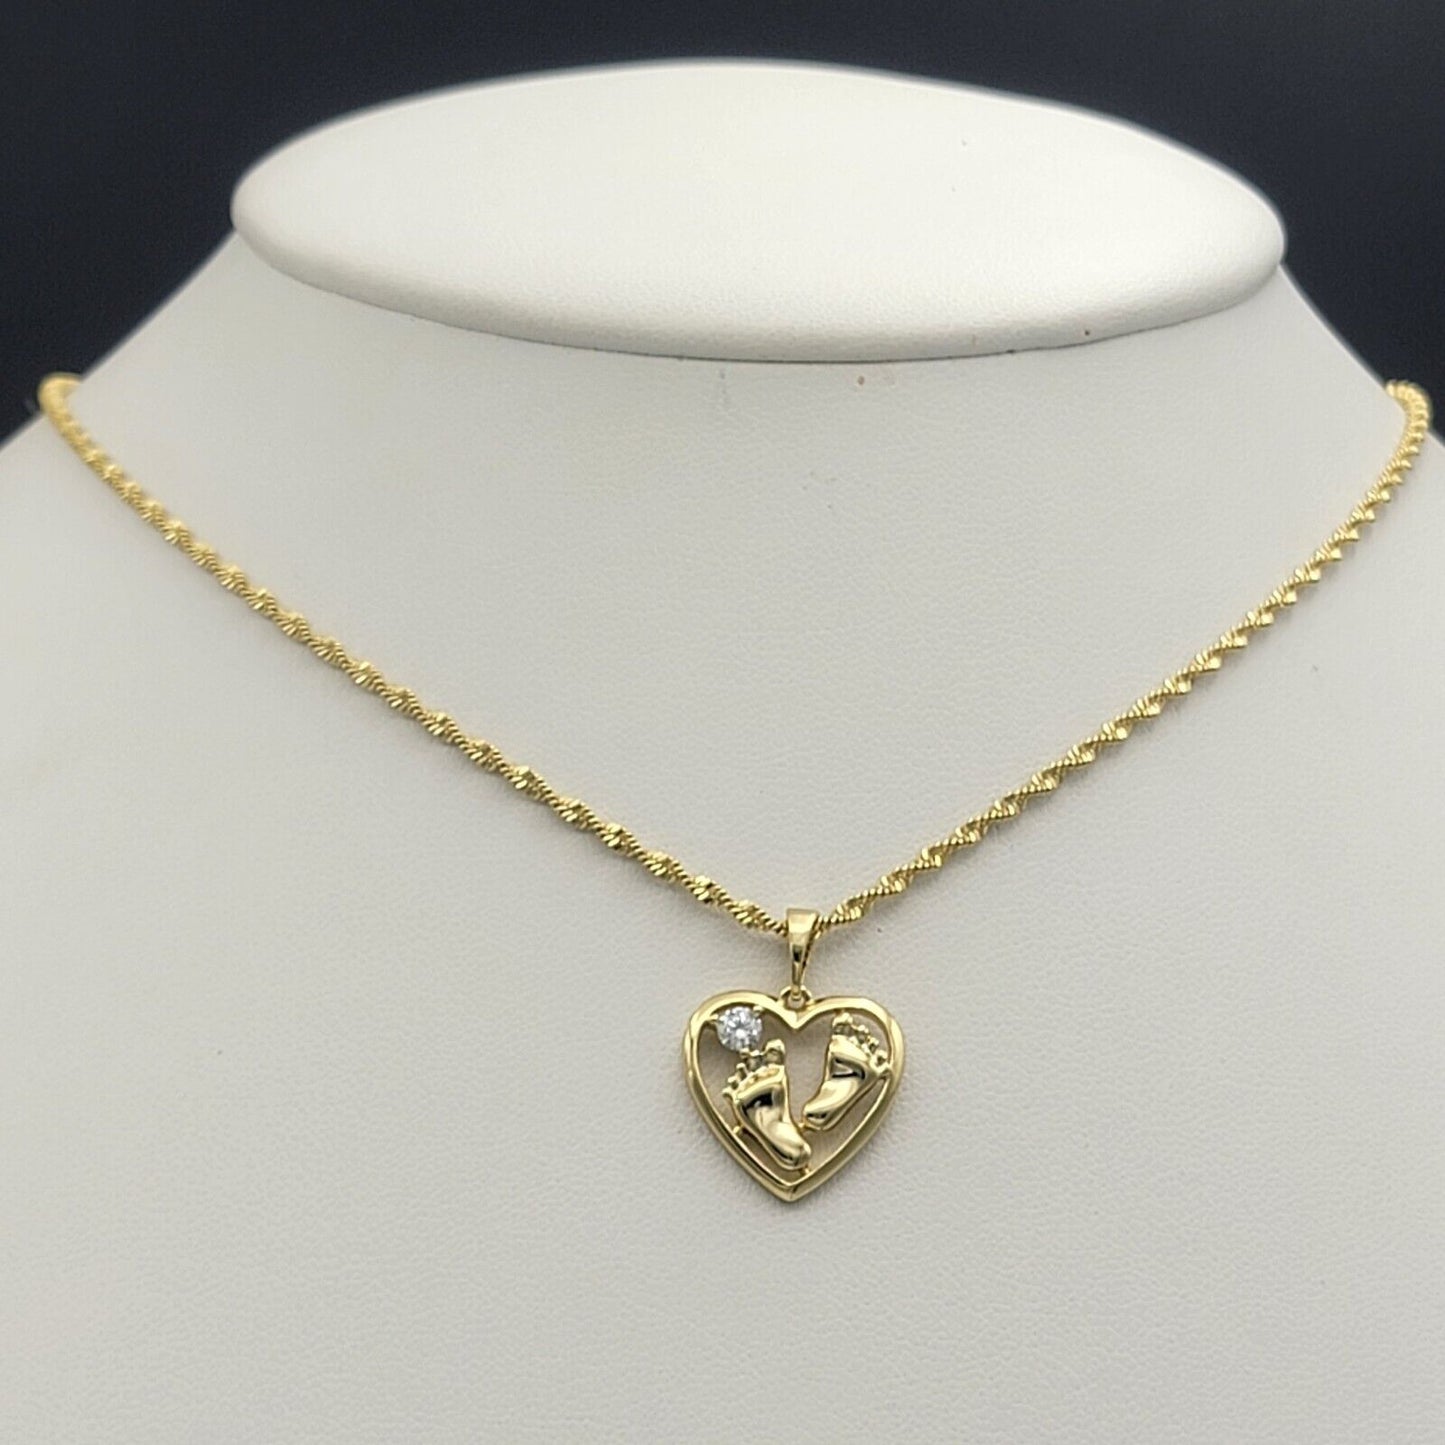 Necklaces - 14K Gold Plated. Feet Heart Charm - Baby Feet Party Footprint Pendant & Chain.